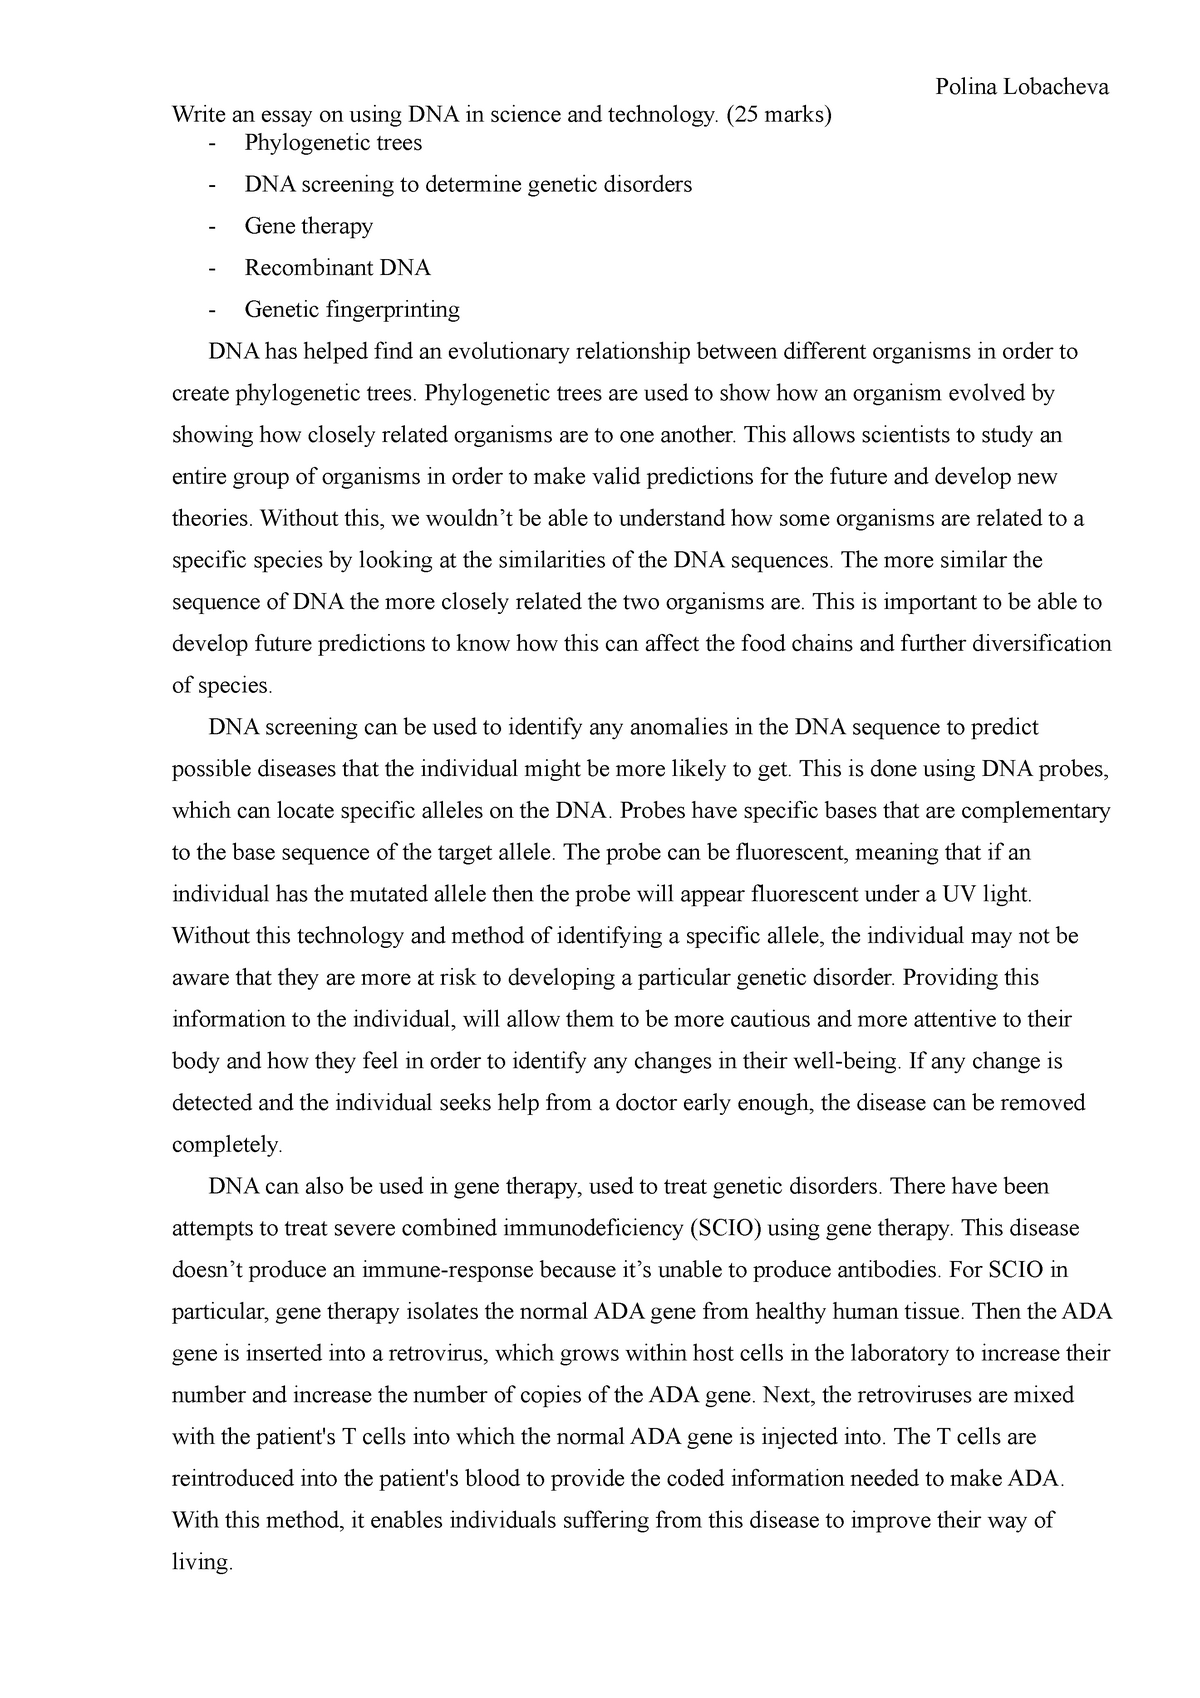 using dna in science and technology essay